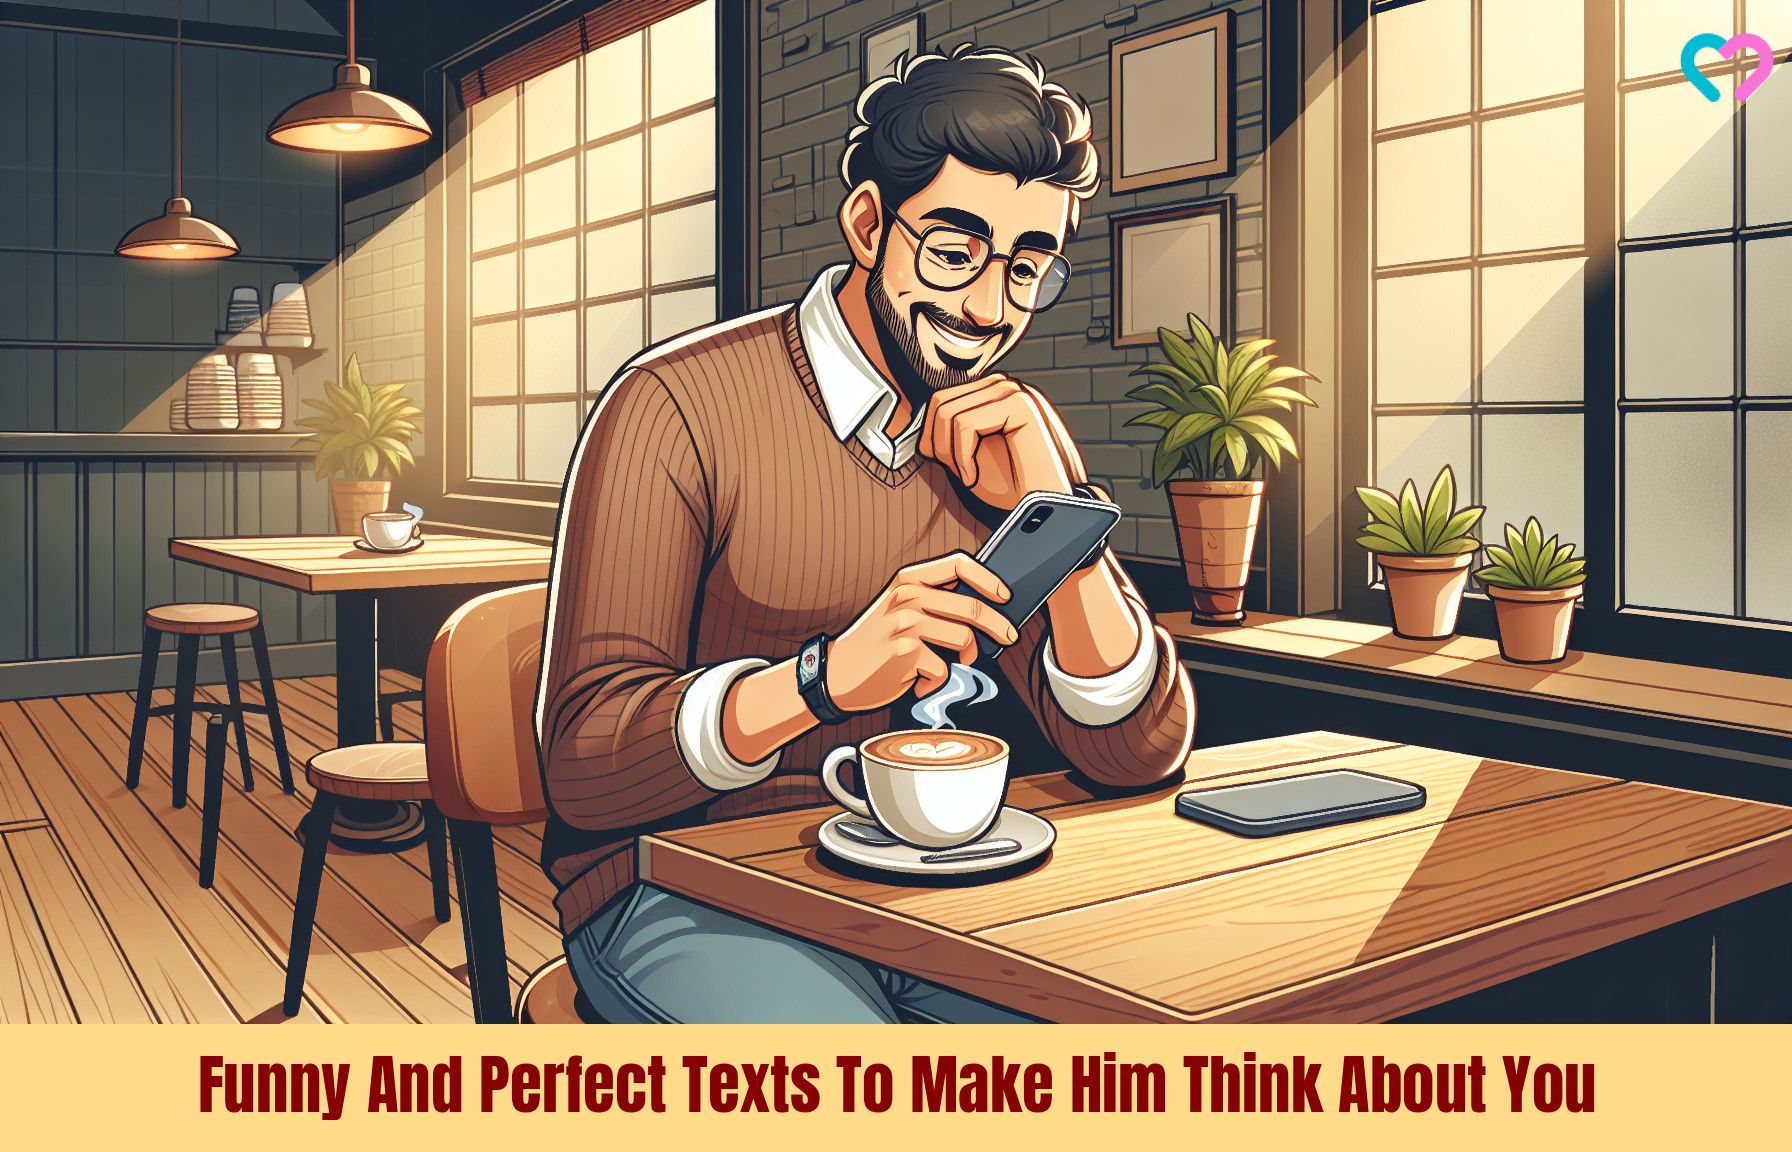 texts to make him think about you_illustration